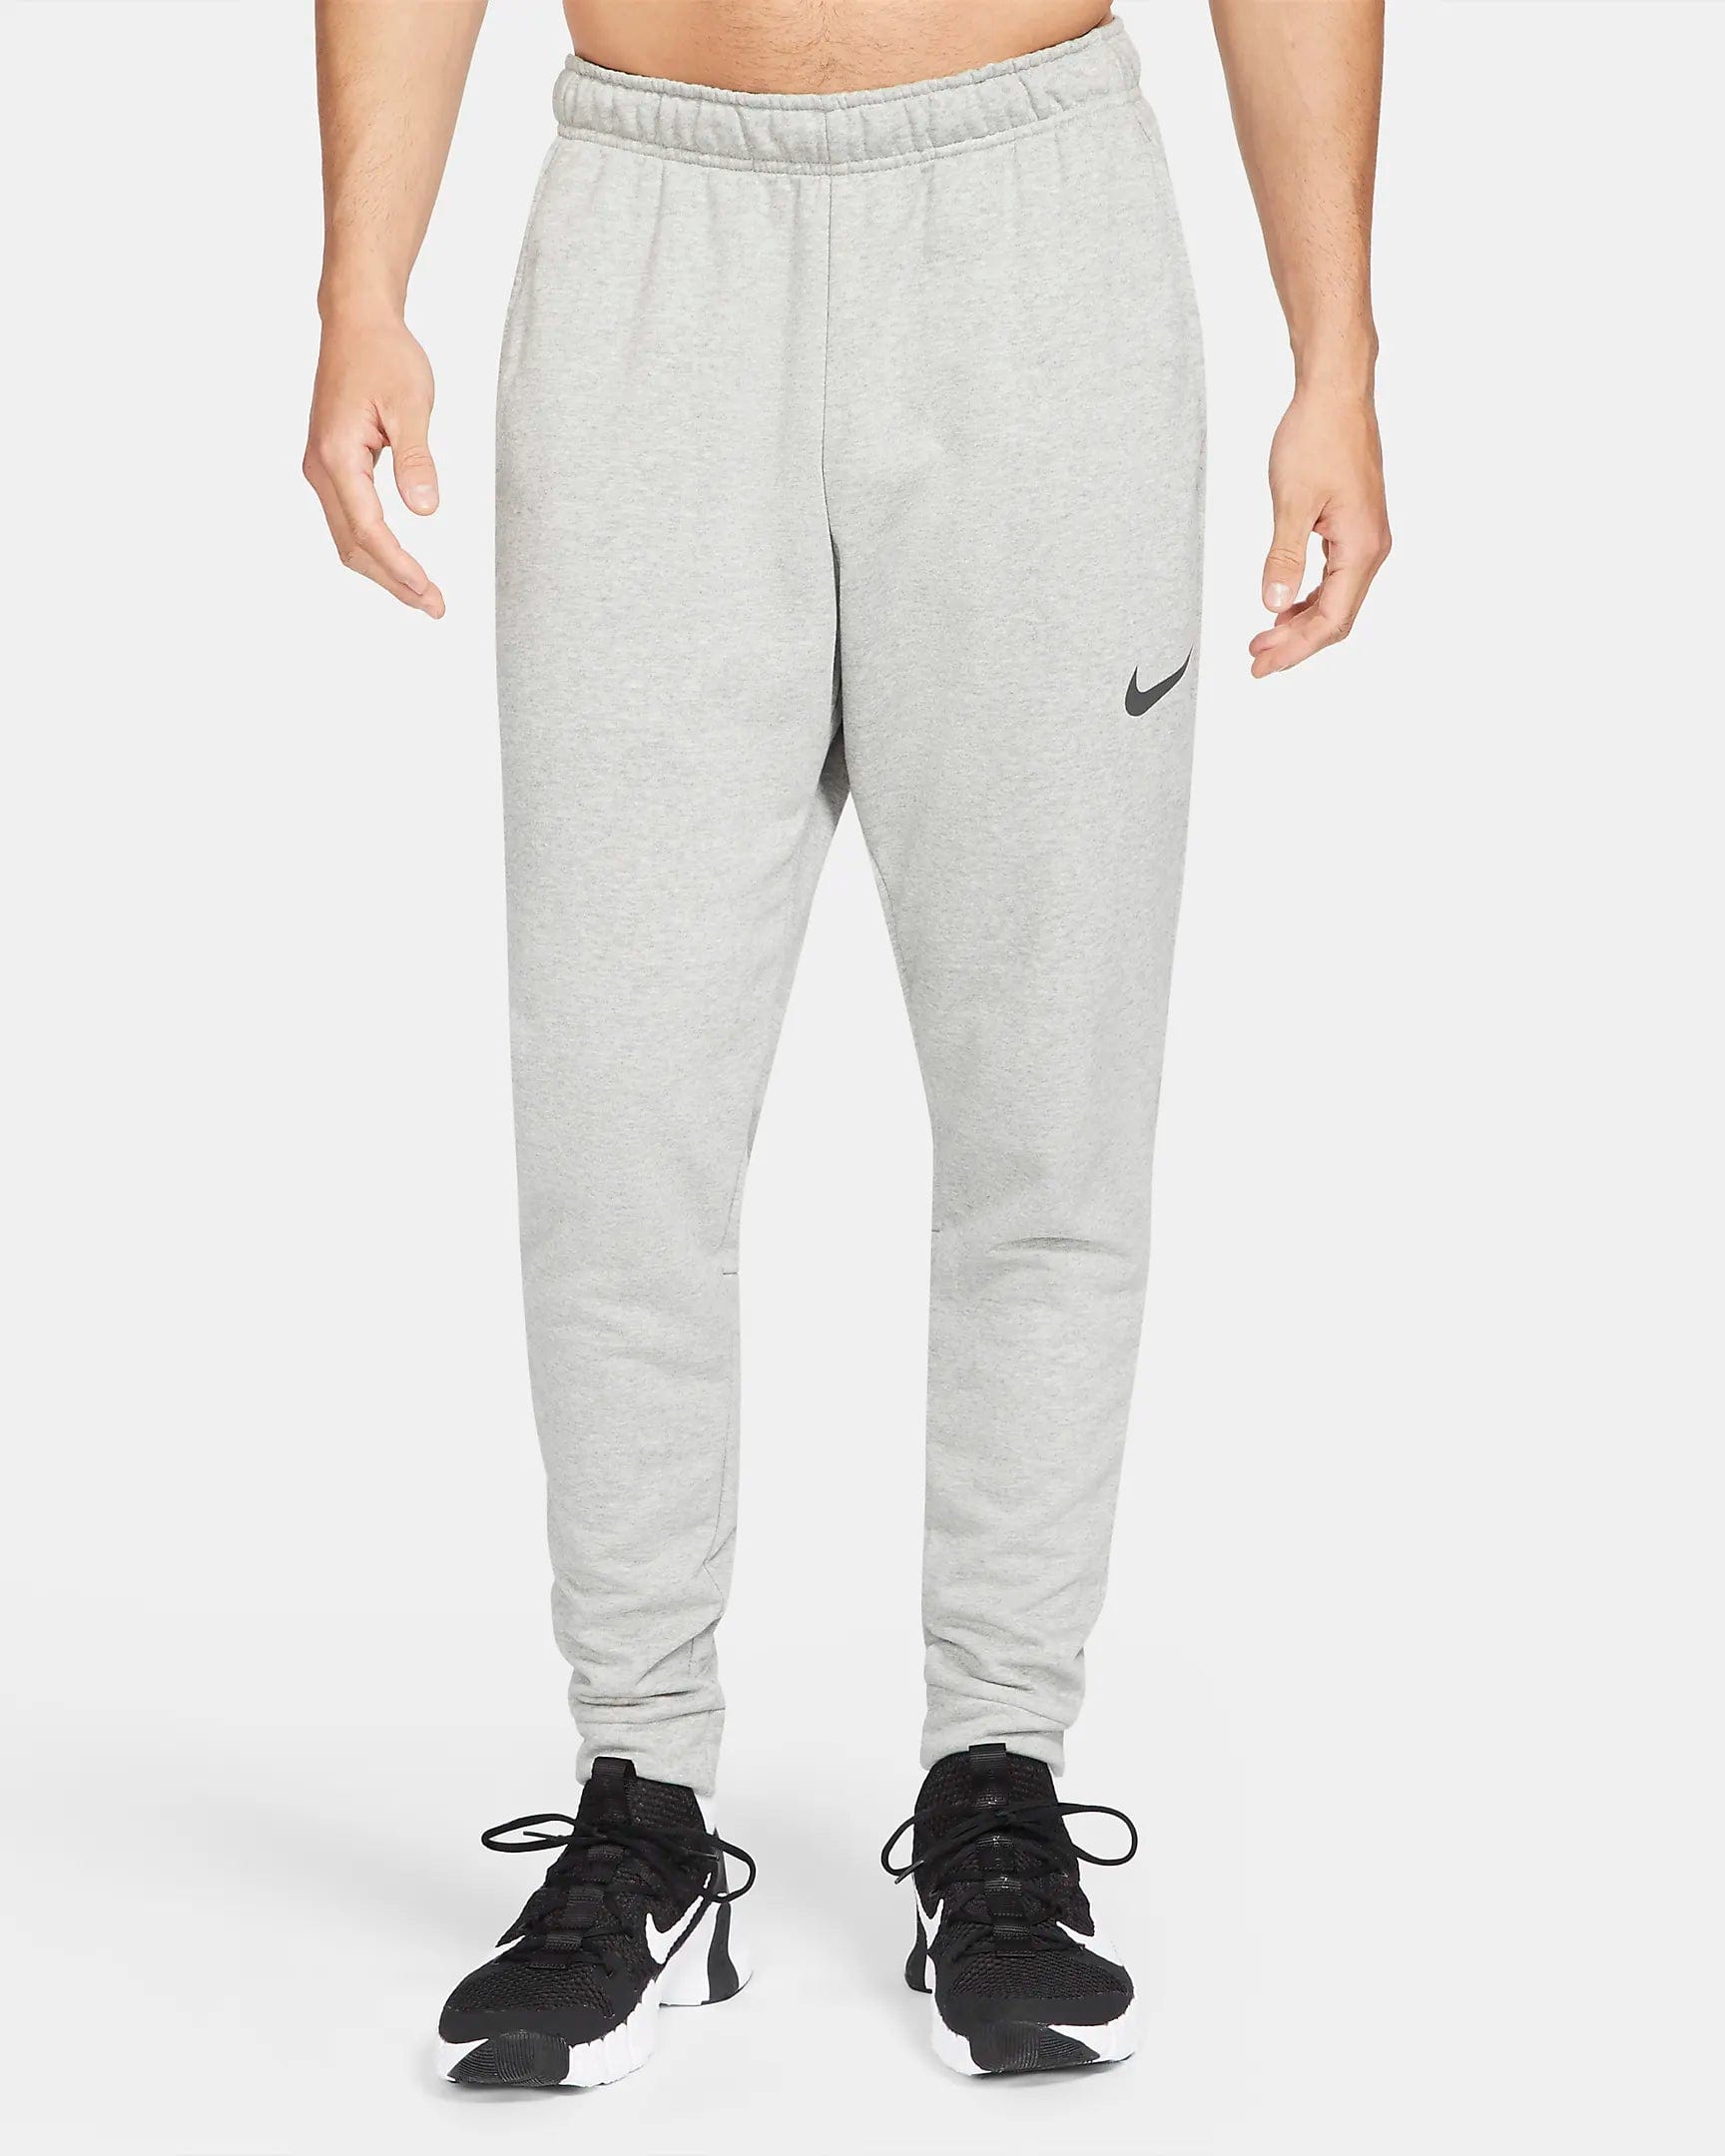 NIKE MEN'S DRI-FIT TAPERED FITNESS GREY TRACKPANTS – INSPORT